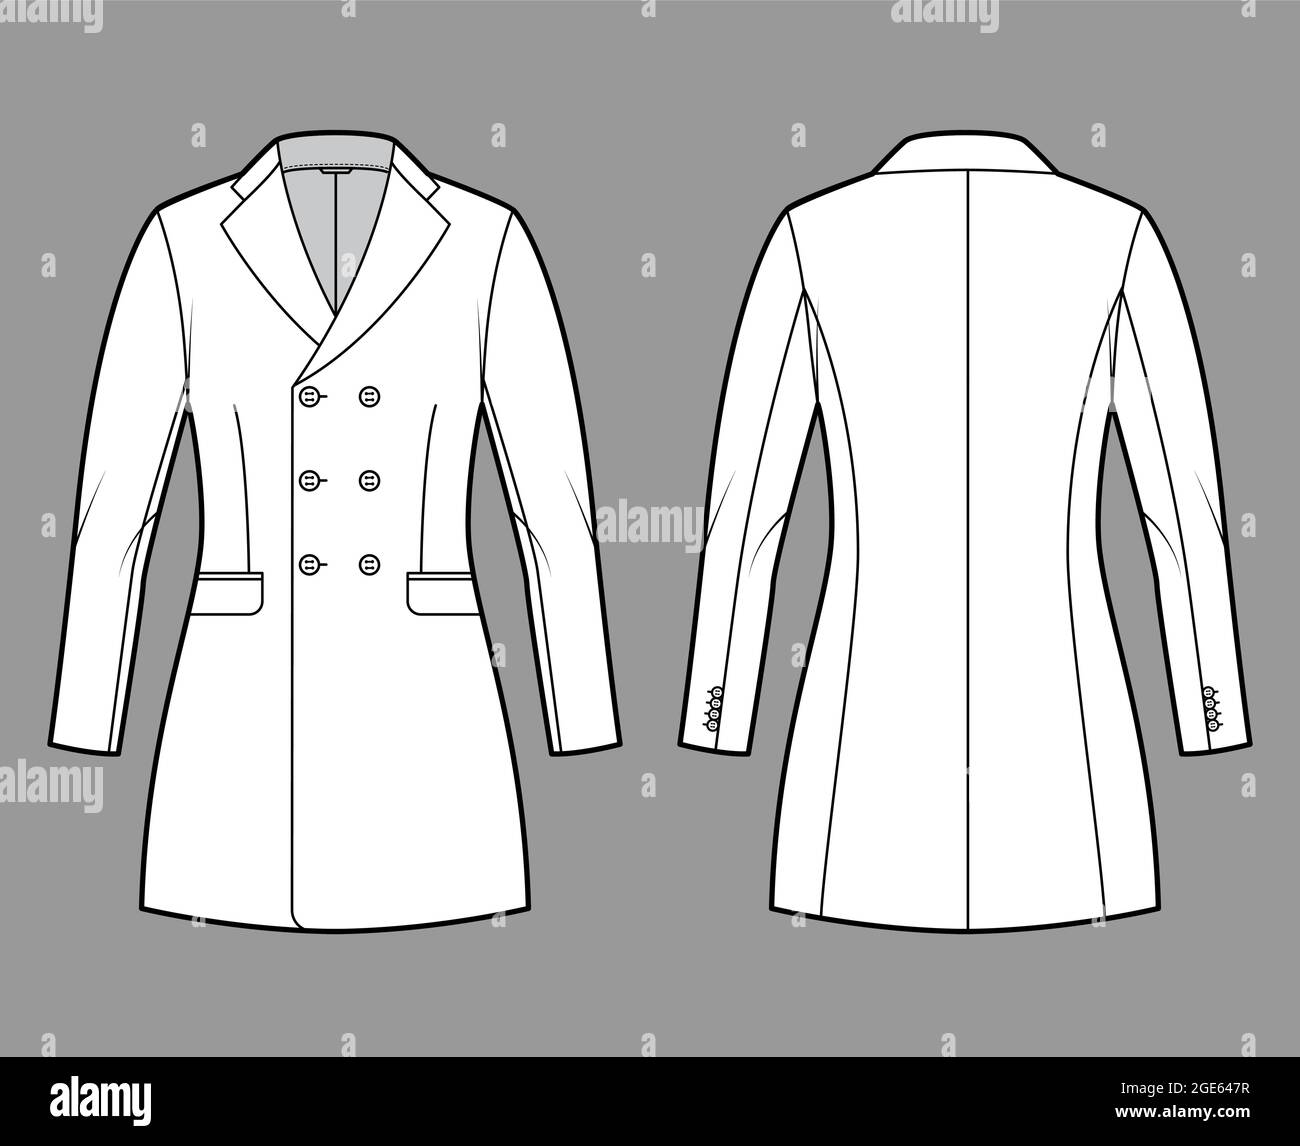 Fitted jacket double breasted suit technical fashion illustration with long sleeves, notched lapel collar, flap pockets, fingertip length. Flat coat template front, back, white color. Women, men CAD Stock Vector